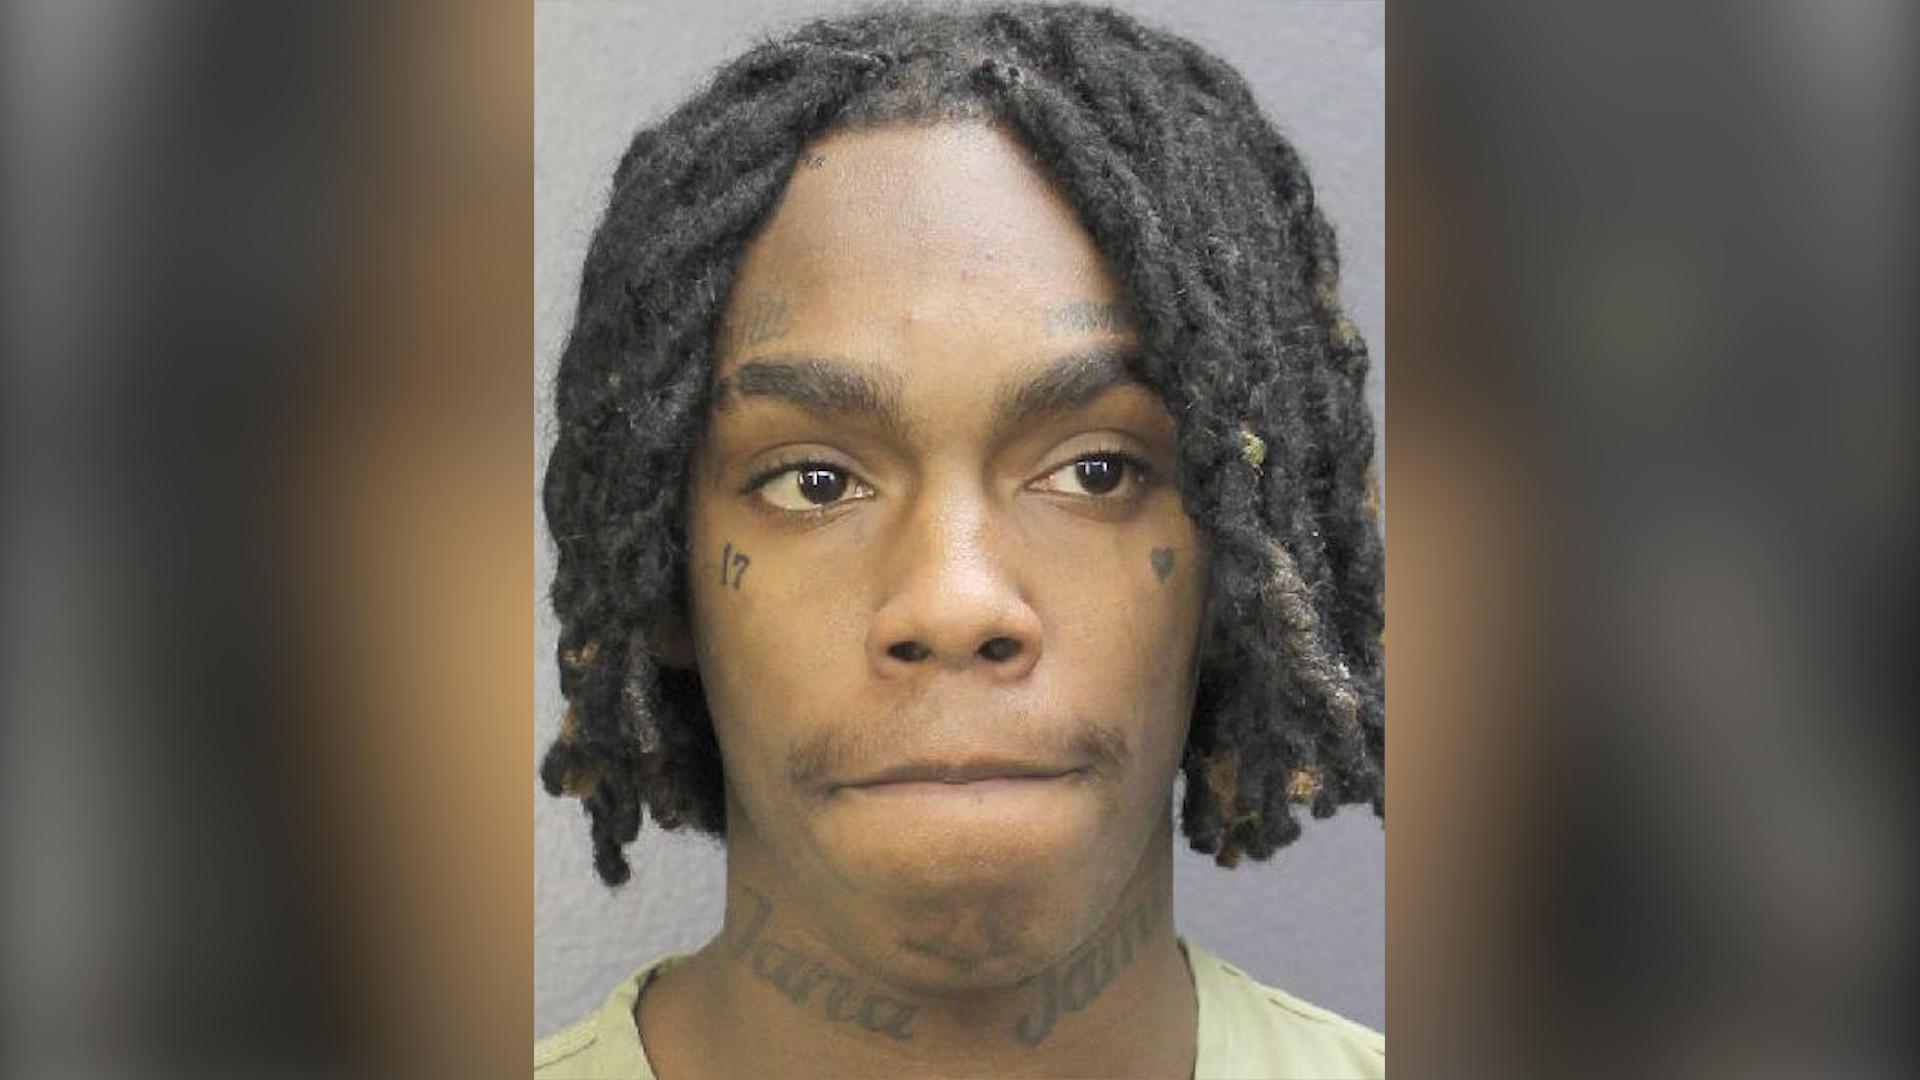 YNW Melly Said His Friends Were Killed In A Drive By. But That's Not